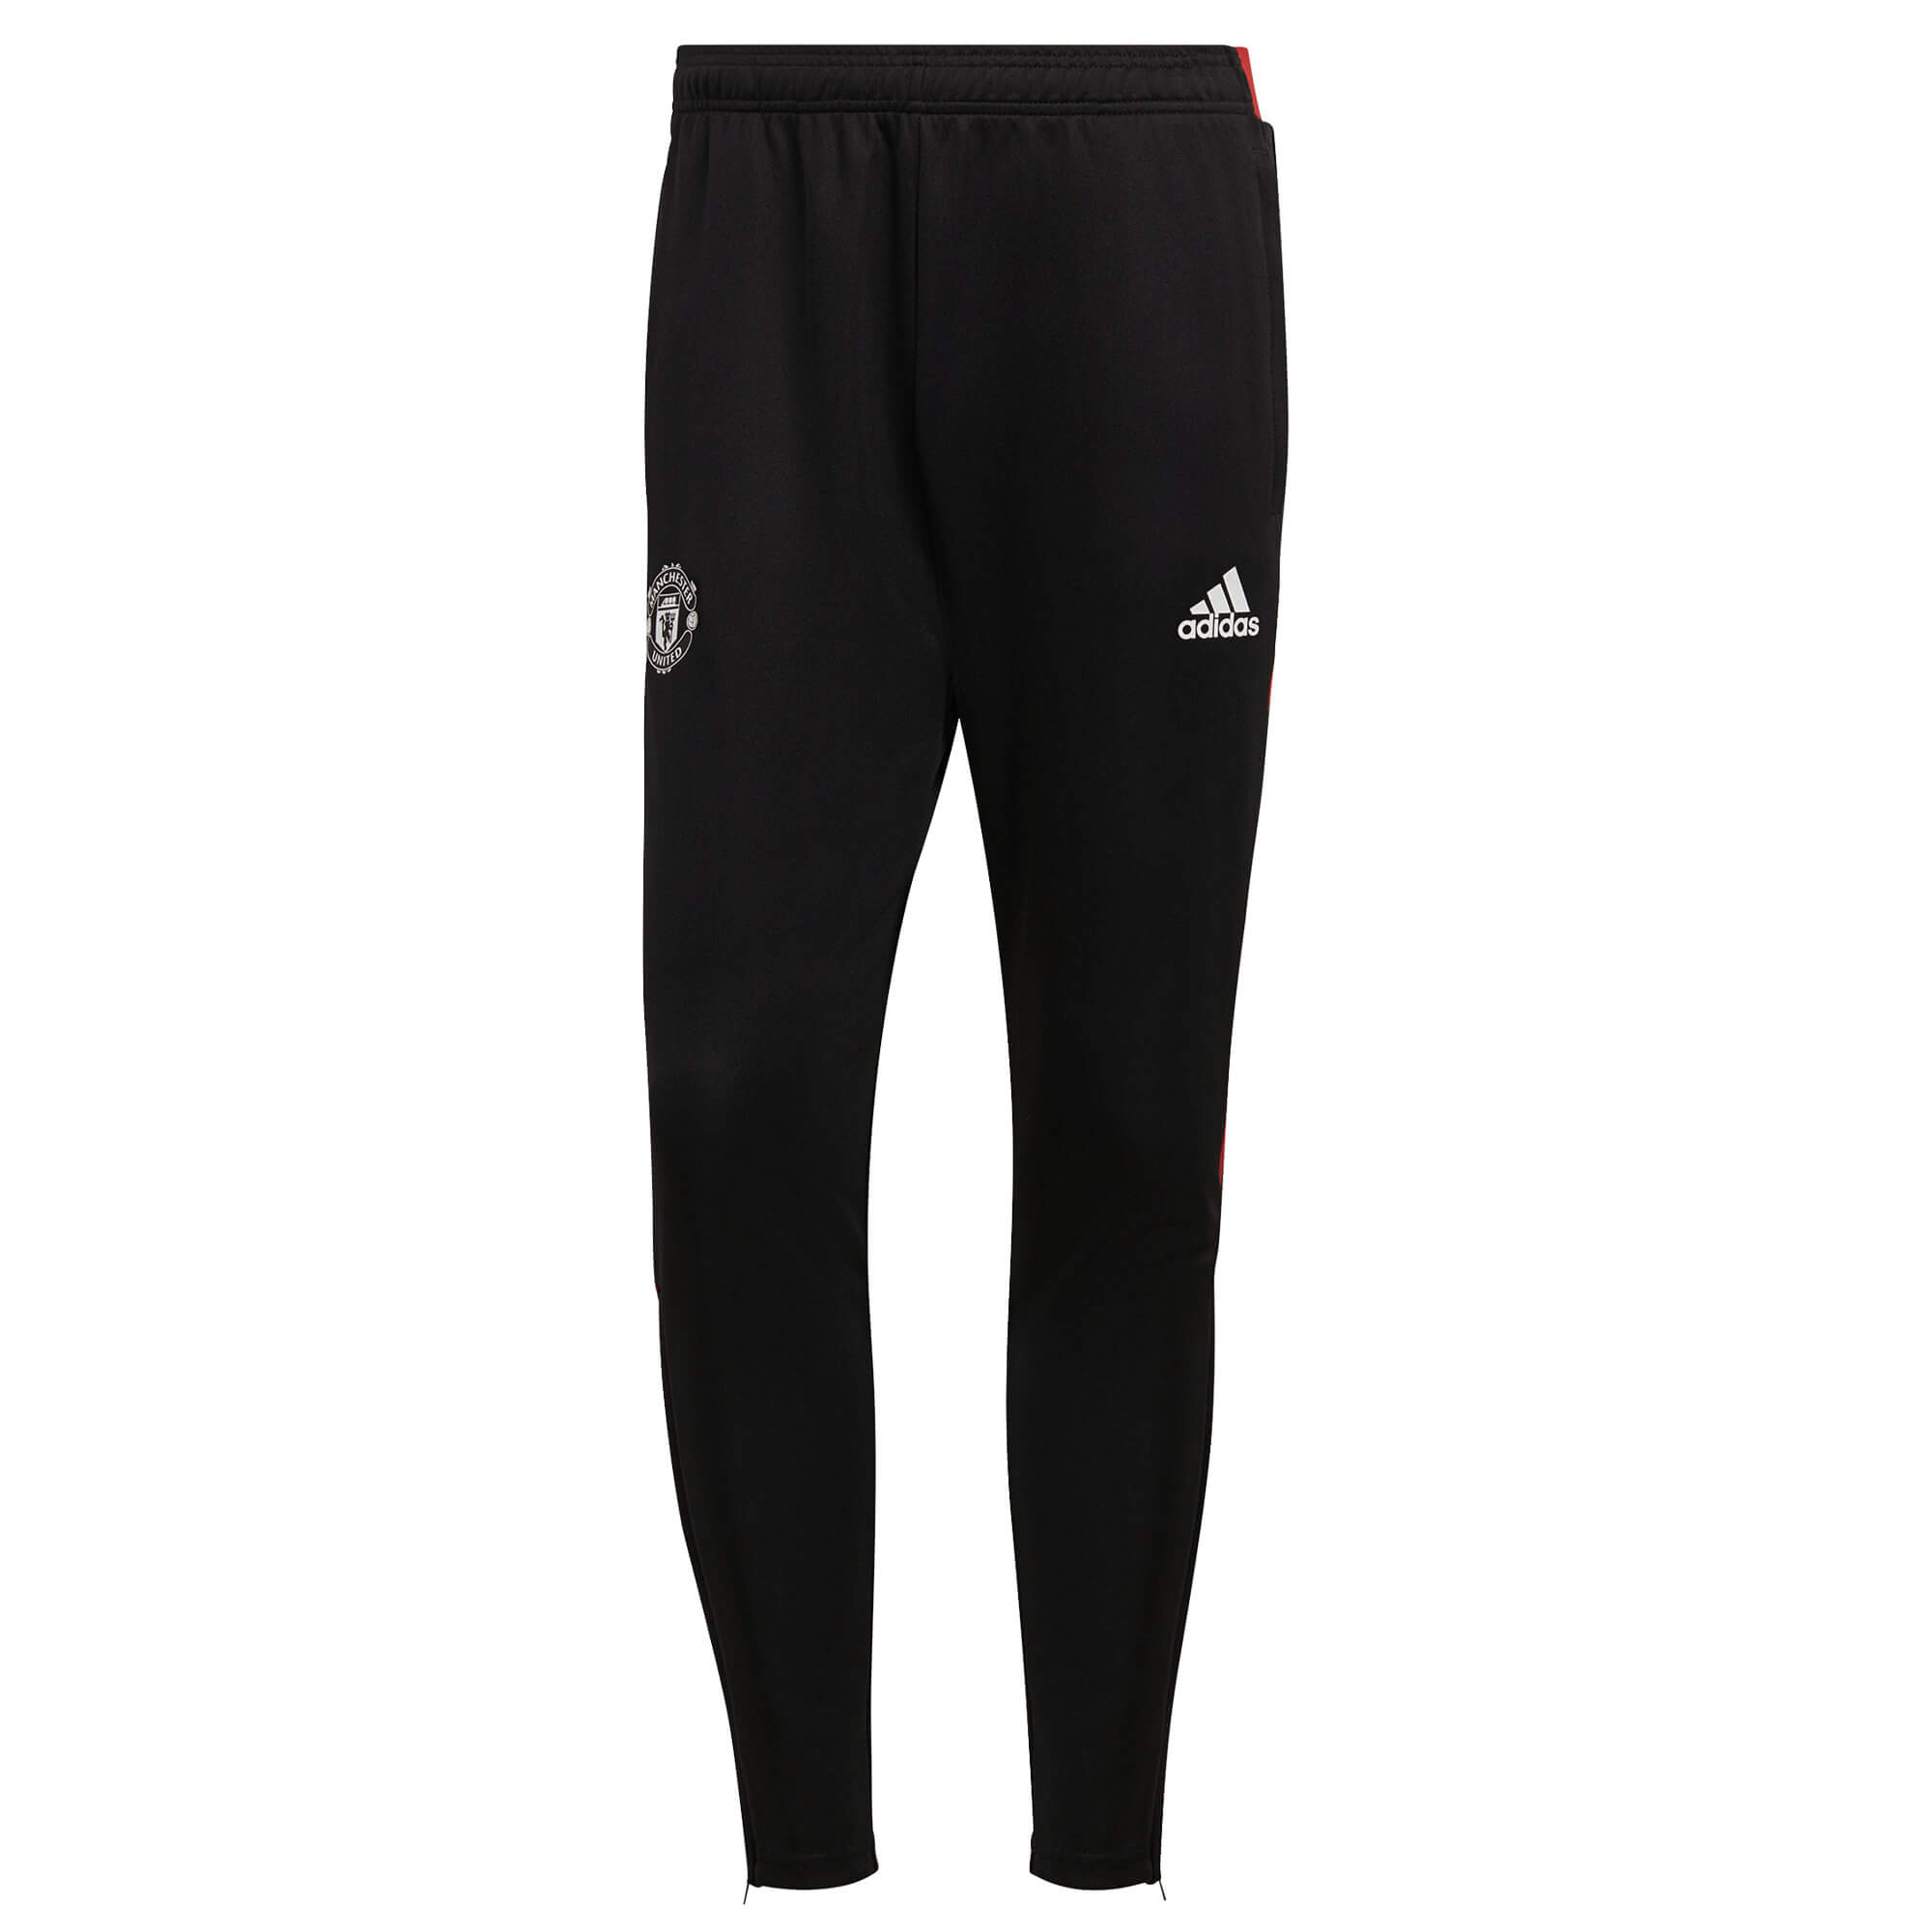 ADIDAS MANCHESTER UNITED TRG PANT NOIR 2021/2022